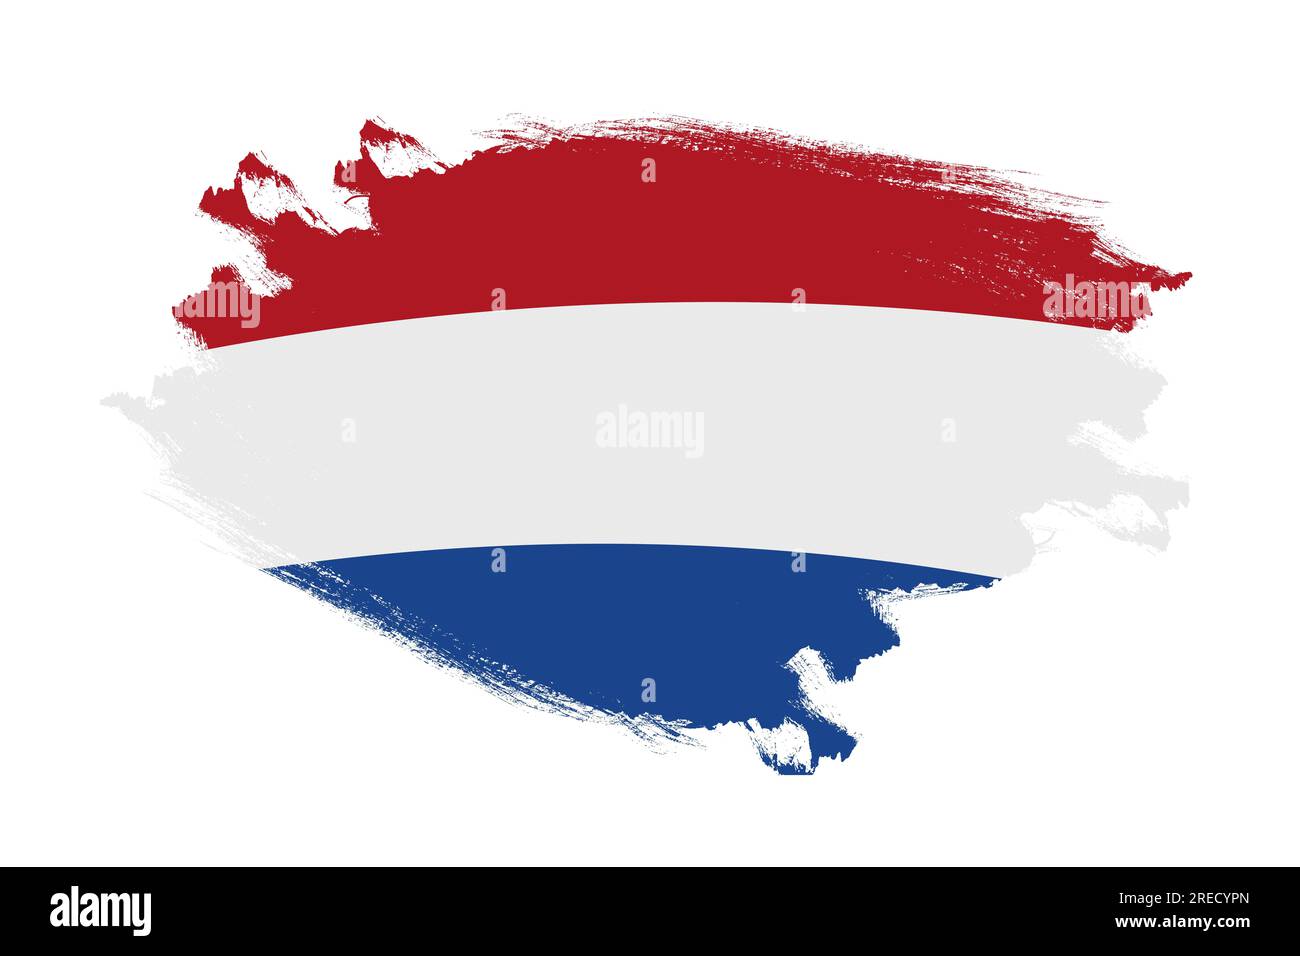 Abstract stroke brush textured national flag of Netherlands on isolated white background Stock Photo